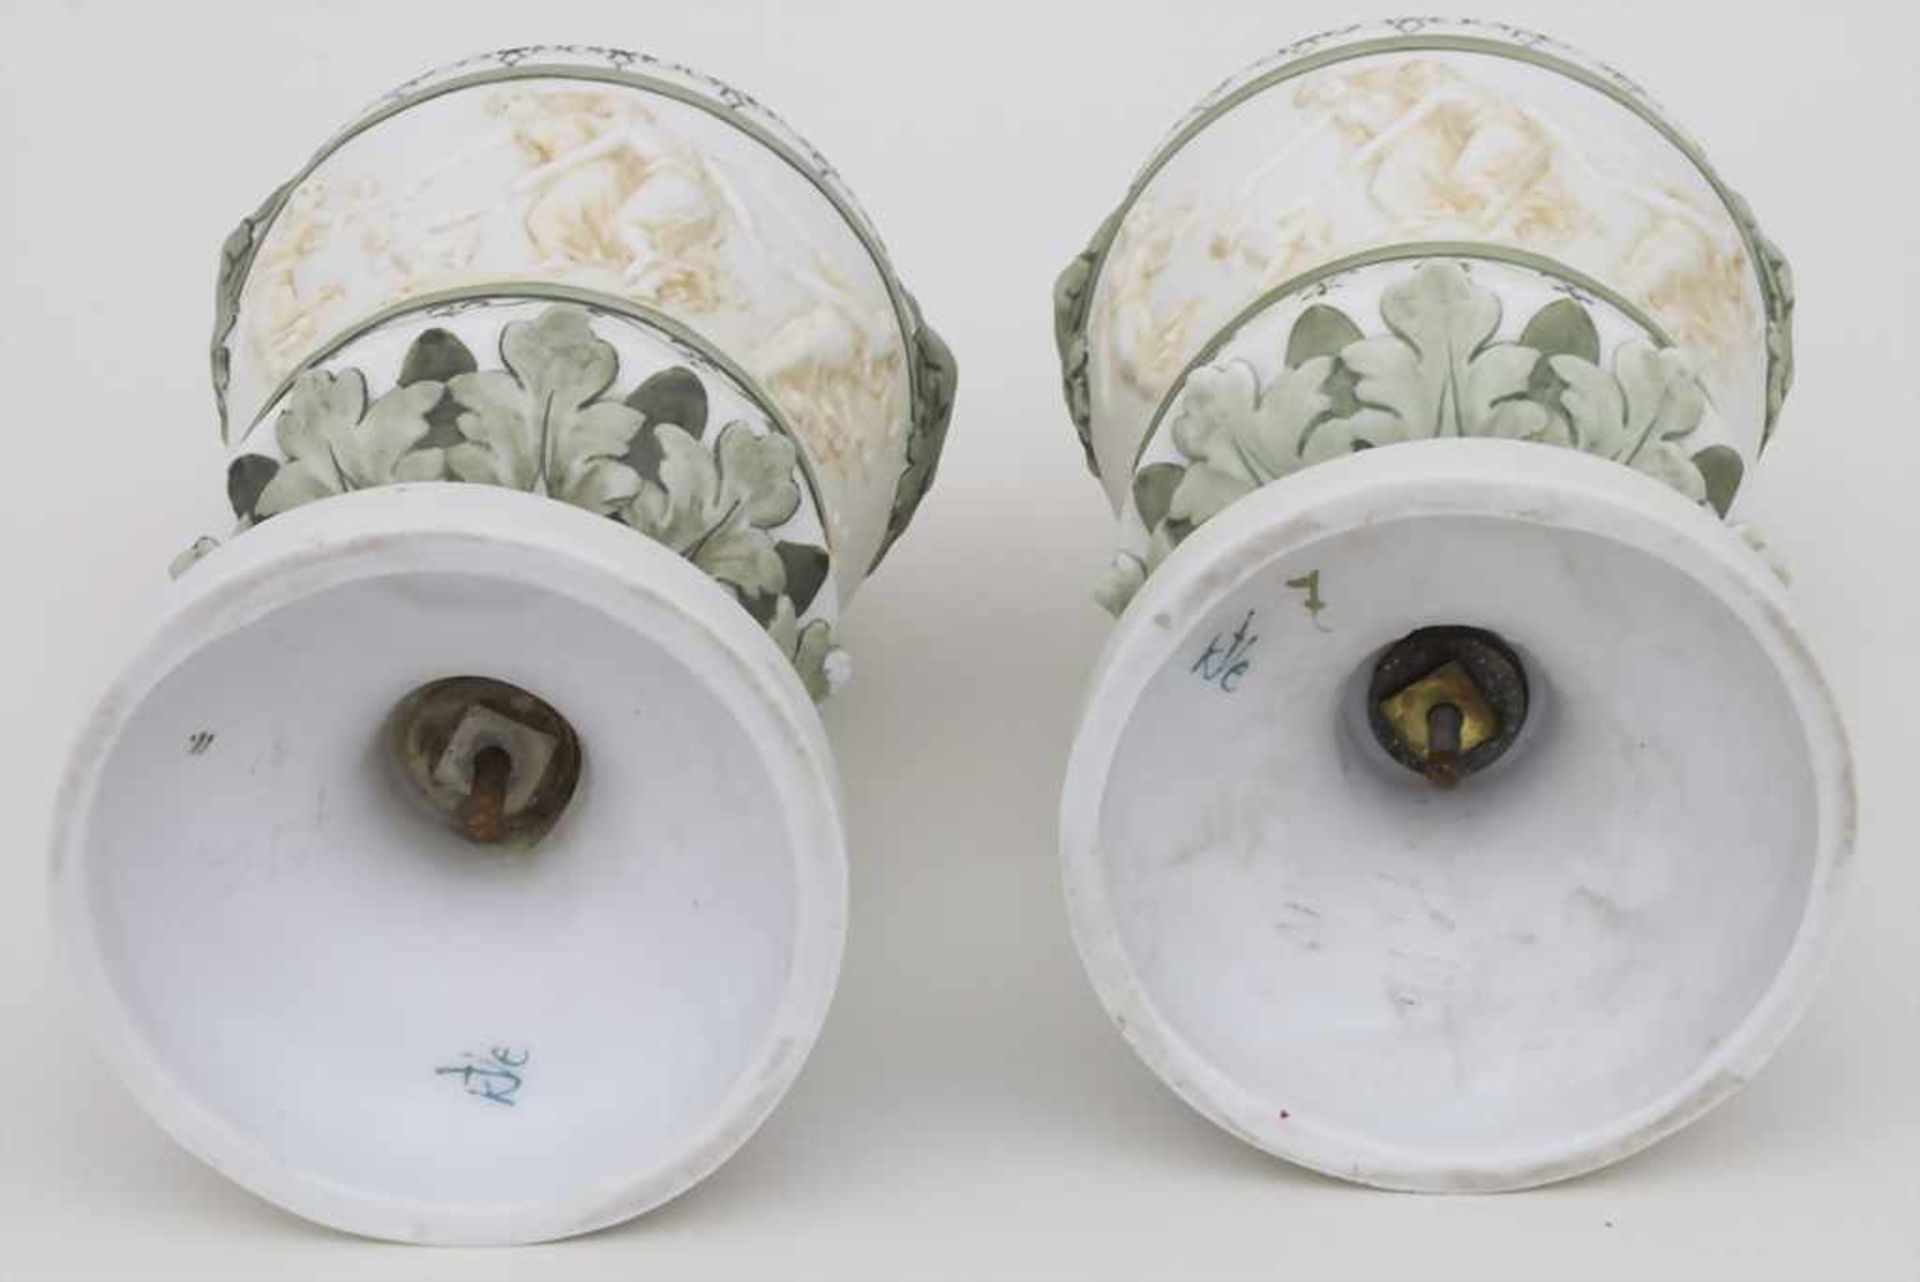 Paar Deckelvasen mit Relieffries / A pair of covered vases with relief, Karl Ens, Volkstedt, um - Image 4 of 5